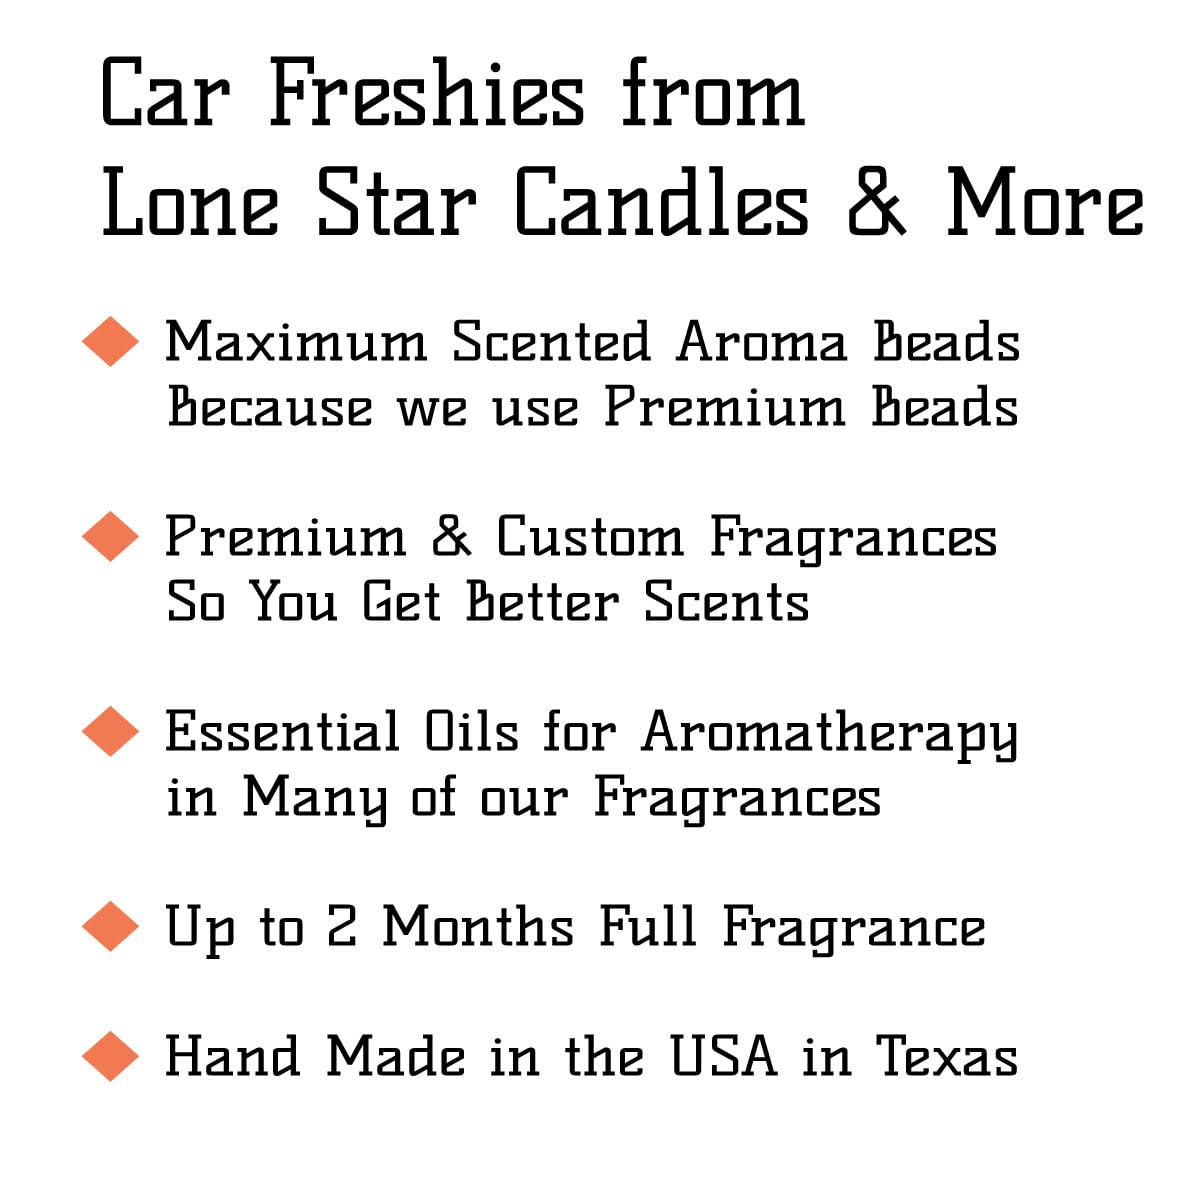 Leather, Lone Star Candles & More’s Premium Strongly Scented Freshies, Authentic Aroma of Genuine Leather, Car & Air Freshener, USA Made in Texas, 3-Color Texas State 2-Pack